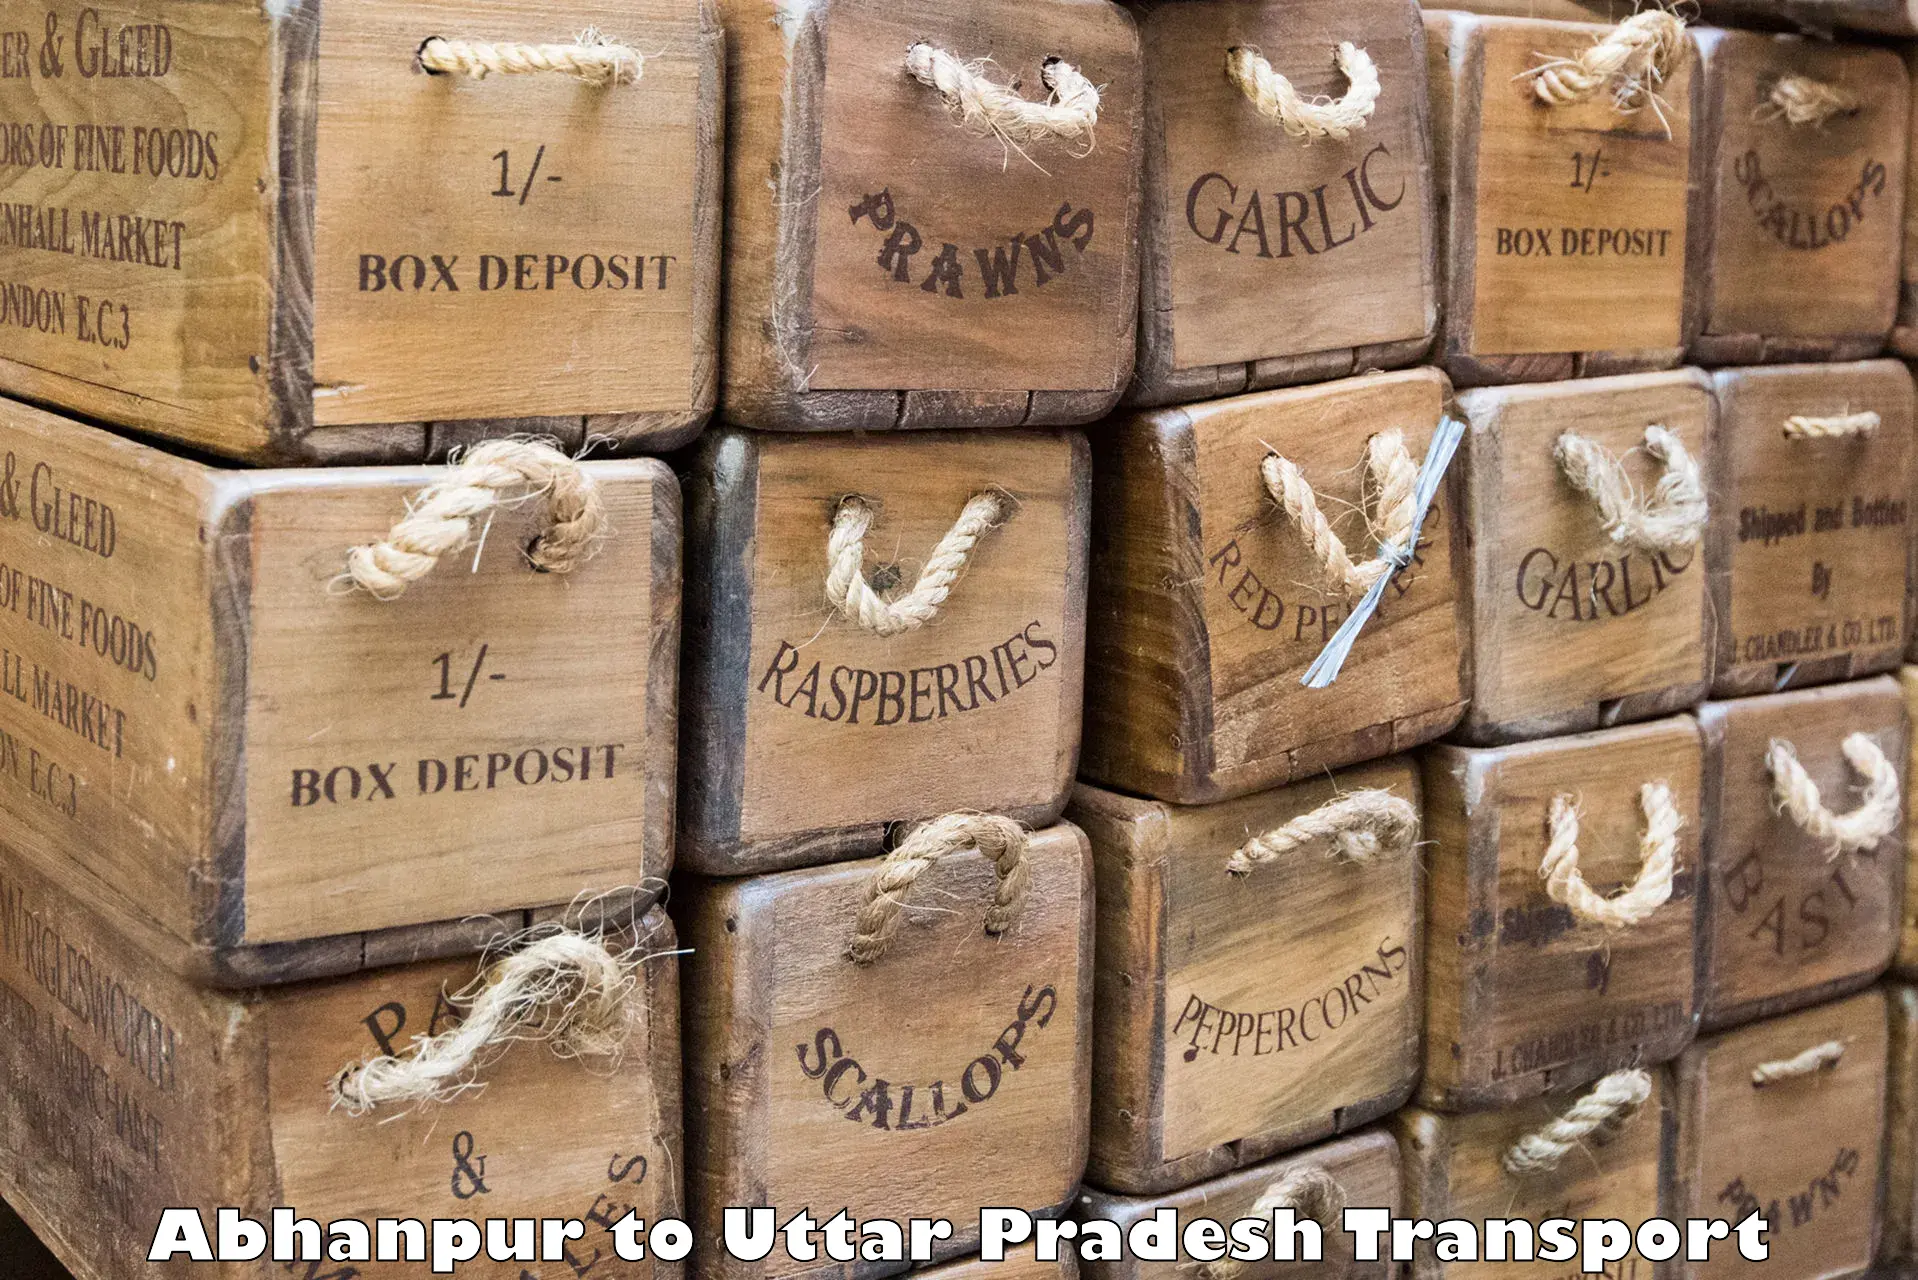 Truck transport companies in India Abhanpur to Shikohabad